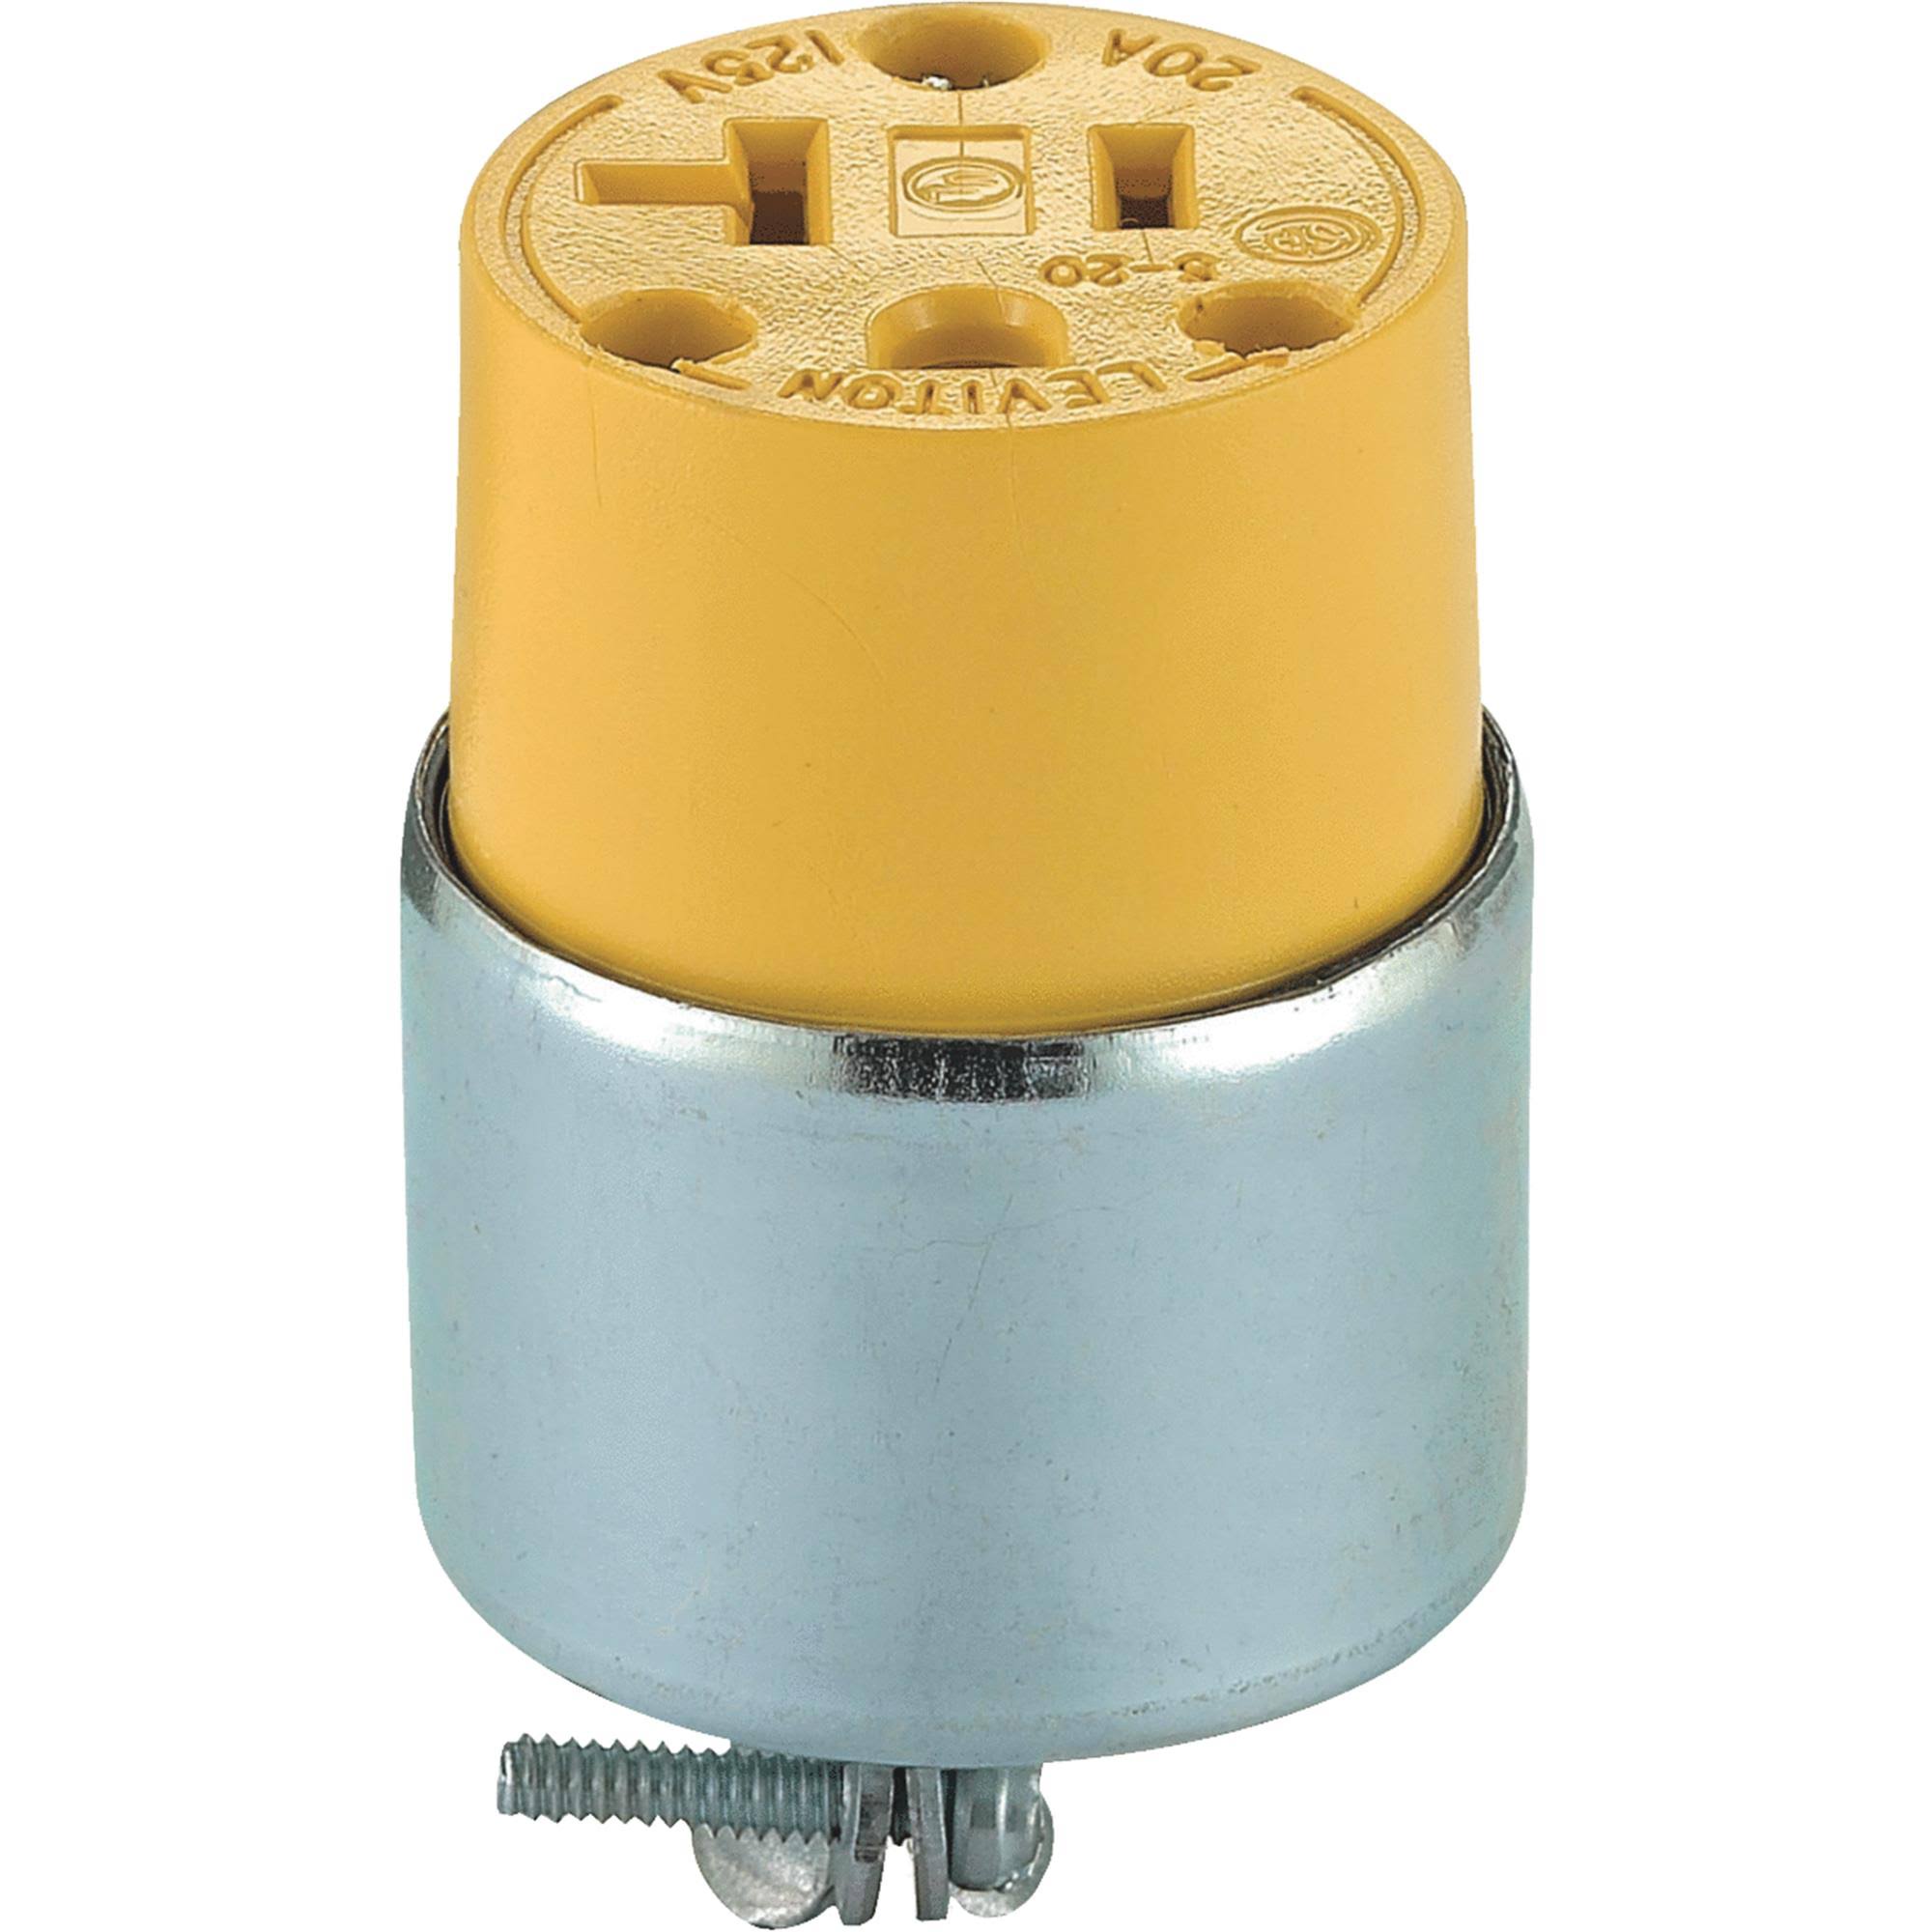 Leviton Armored Grounding Connector - 20 Amp, 2 Pole